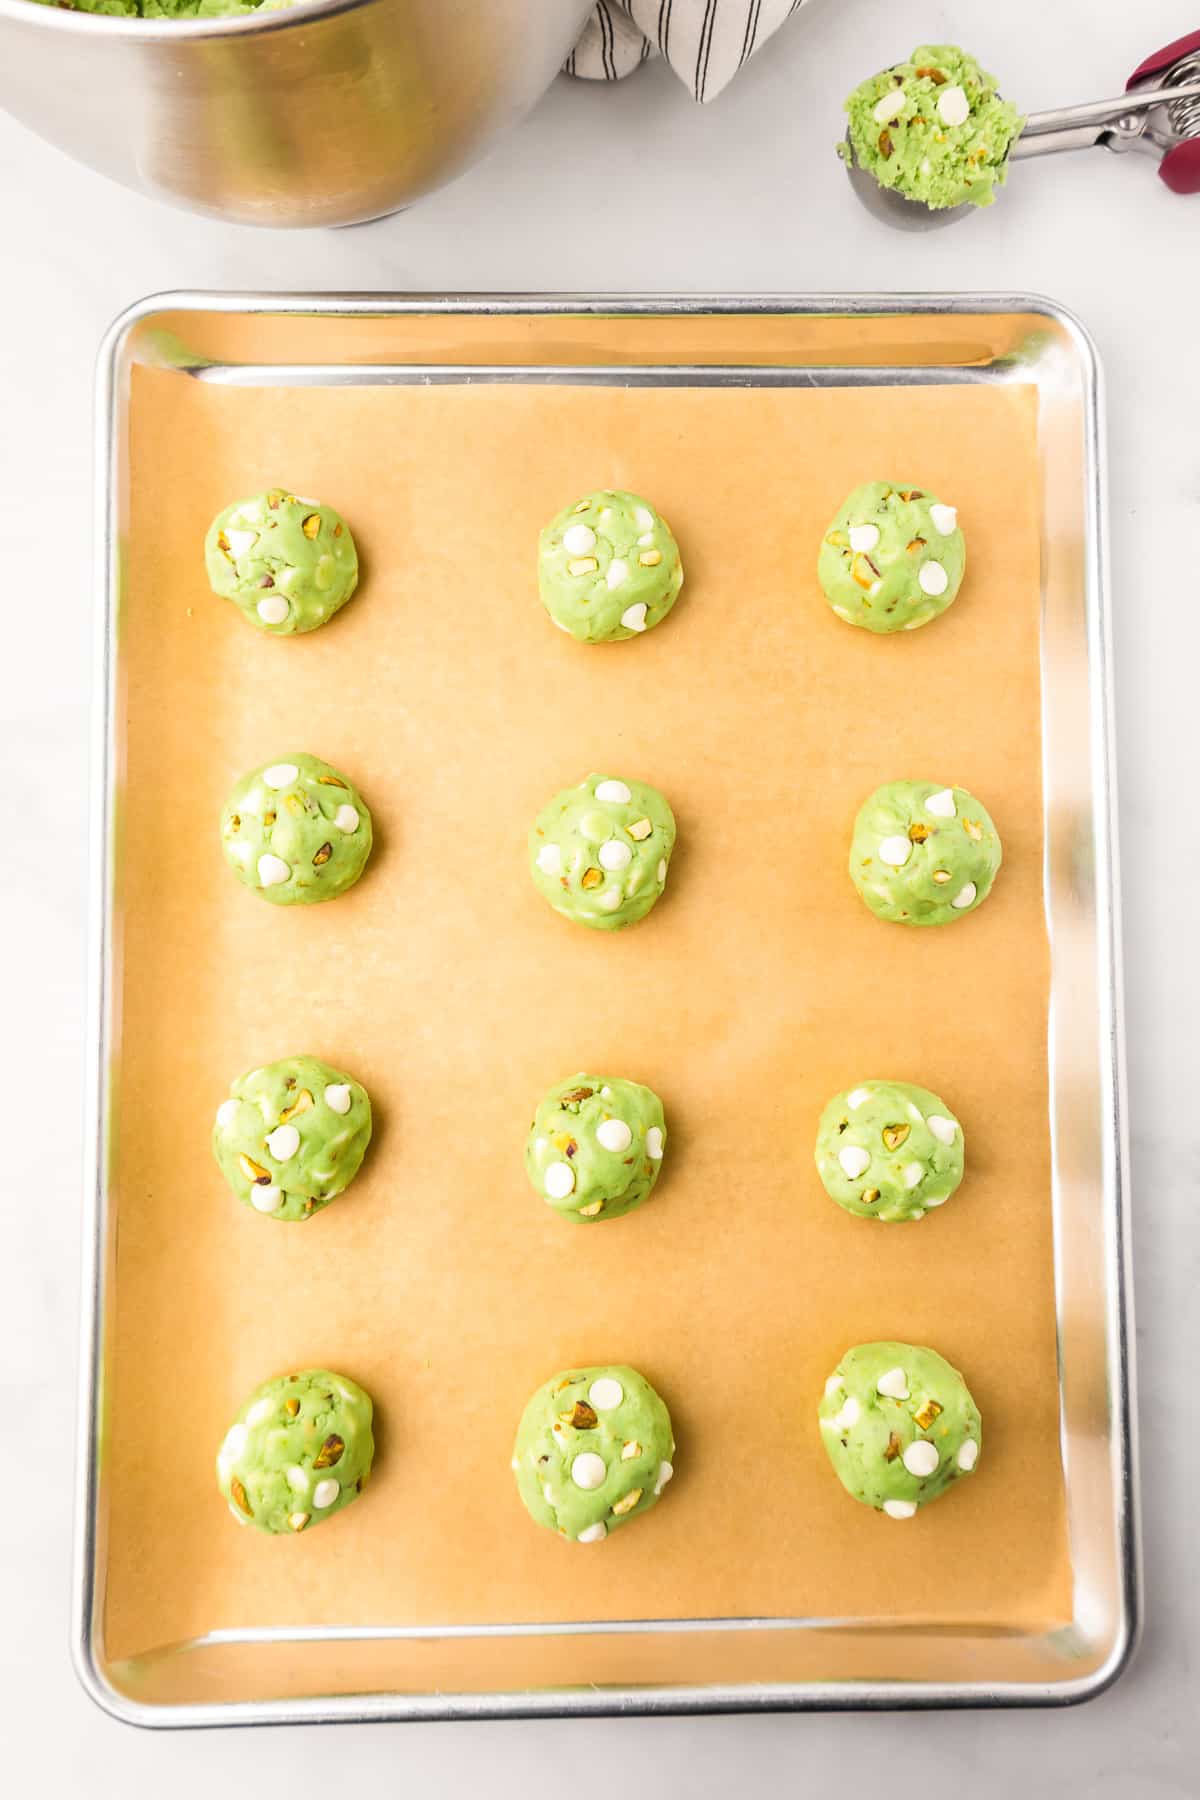 A baking sheet with green pistachio cookie dough topped with white chocolate chips on a baking sheet from above.